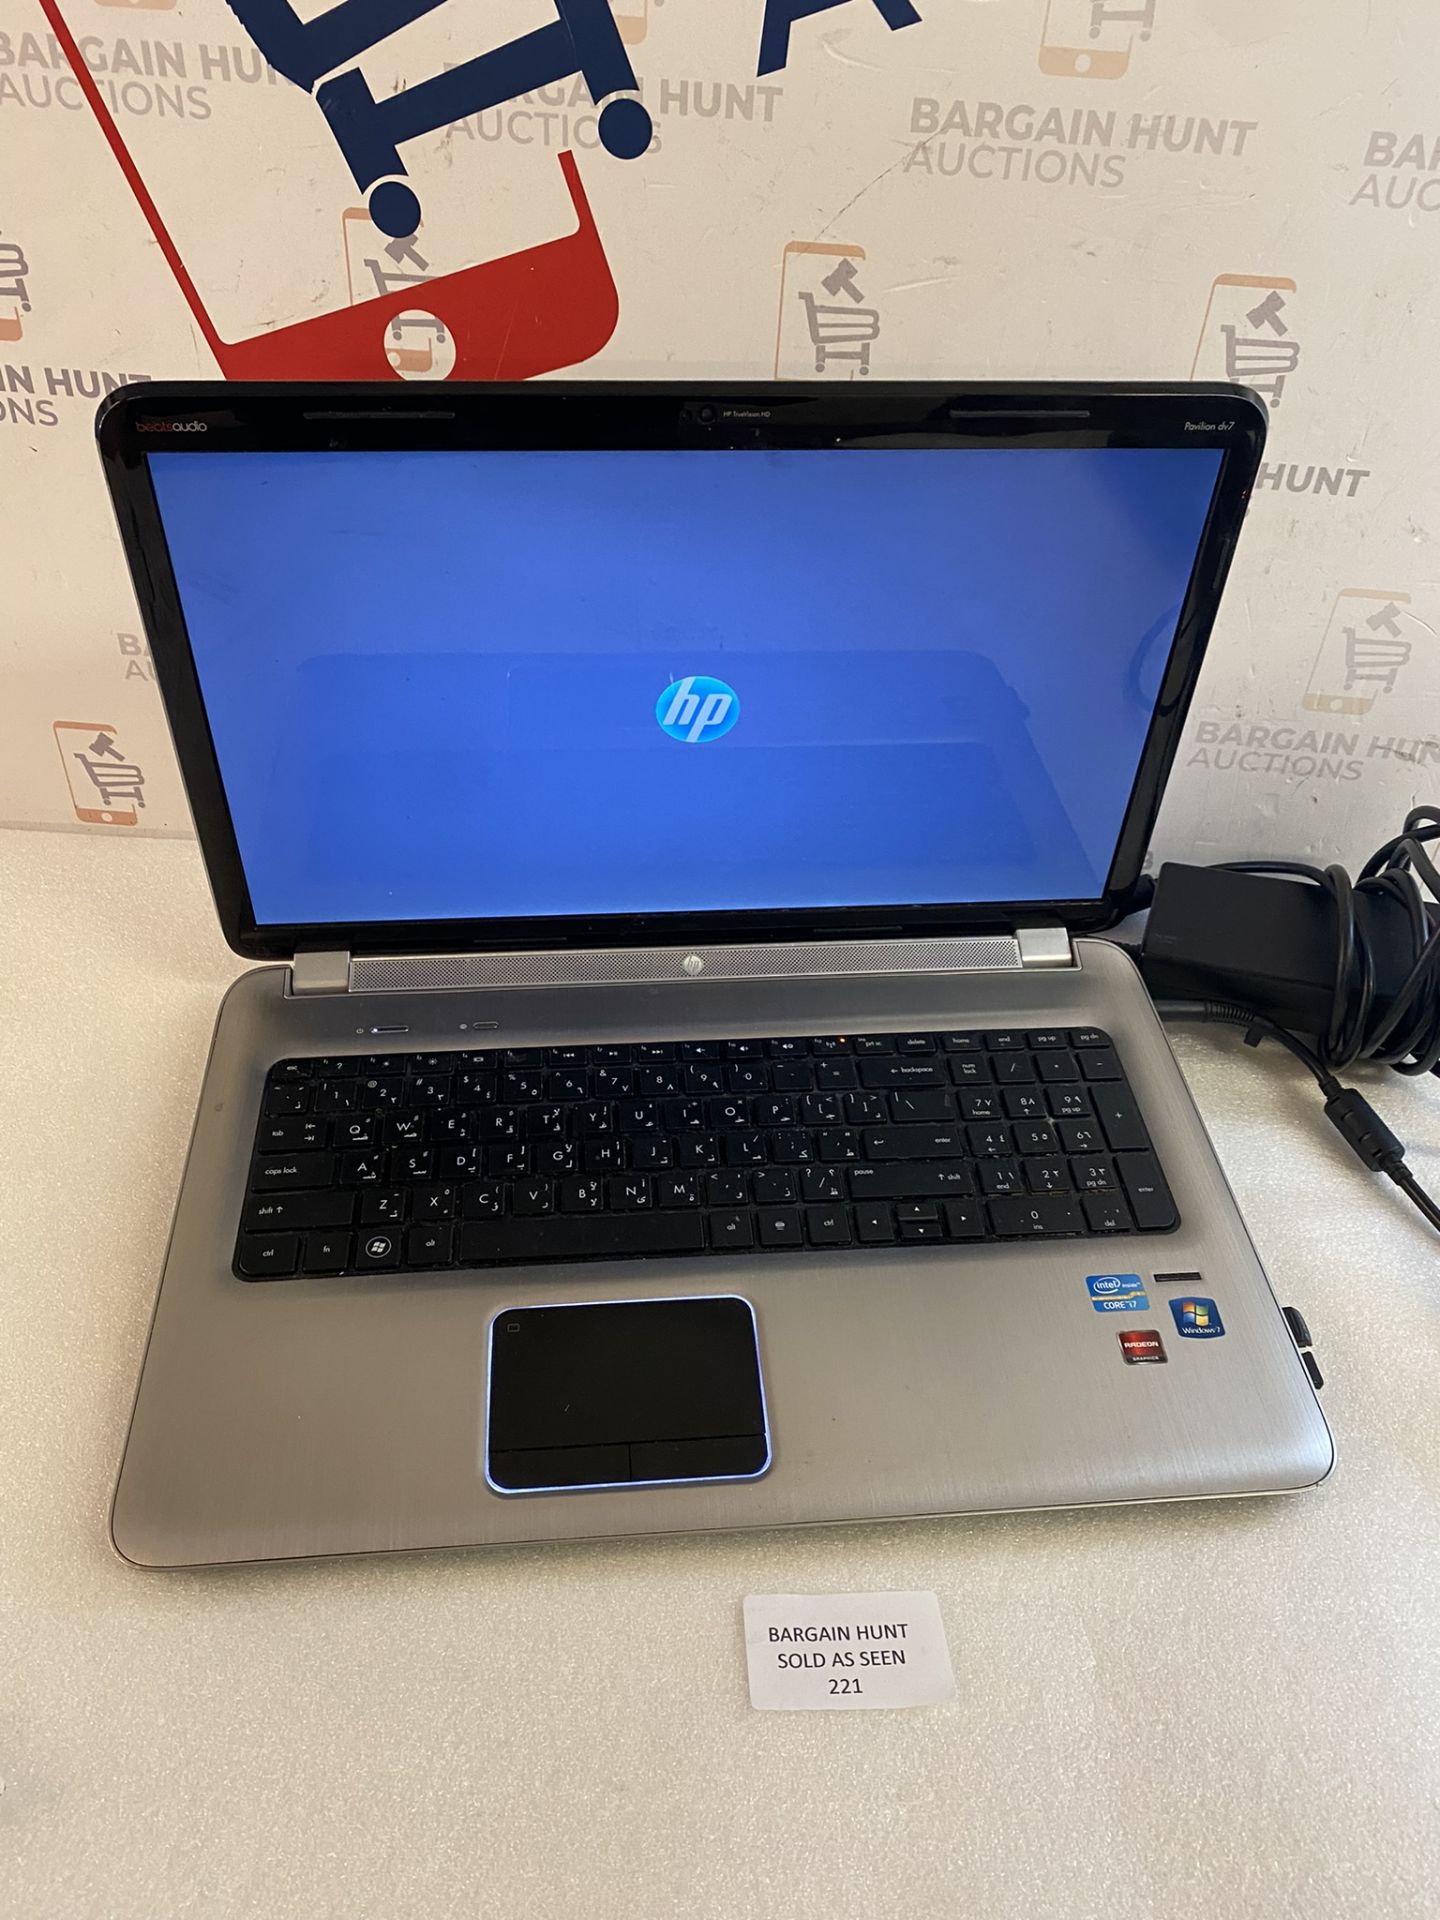 HP Pavilion DV7 i7 Laptop, (doesn't hold charge)